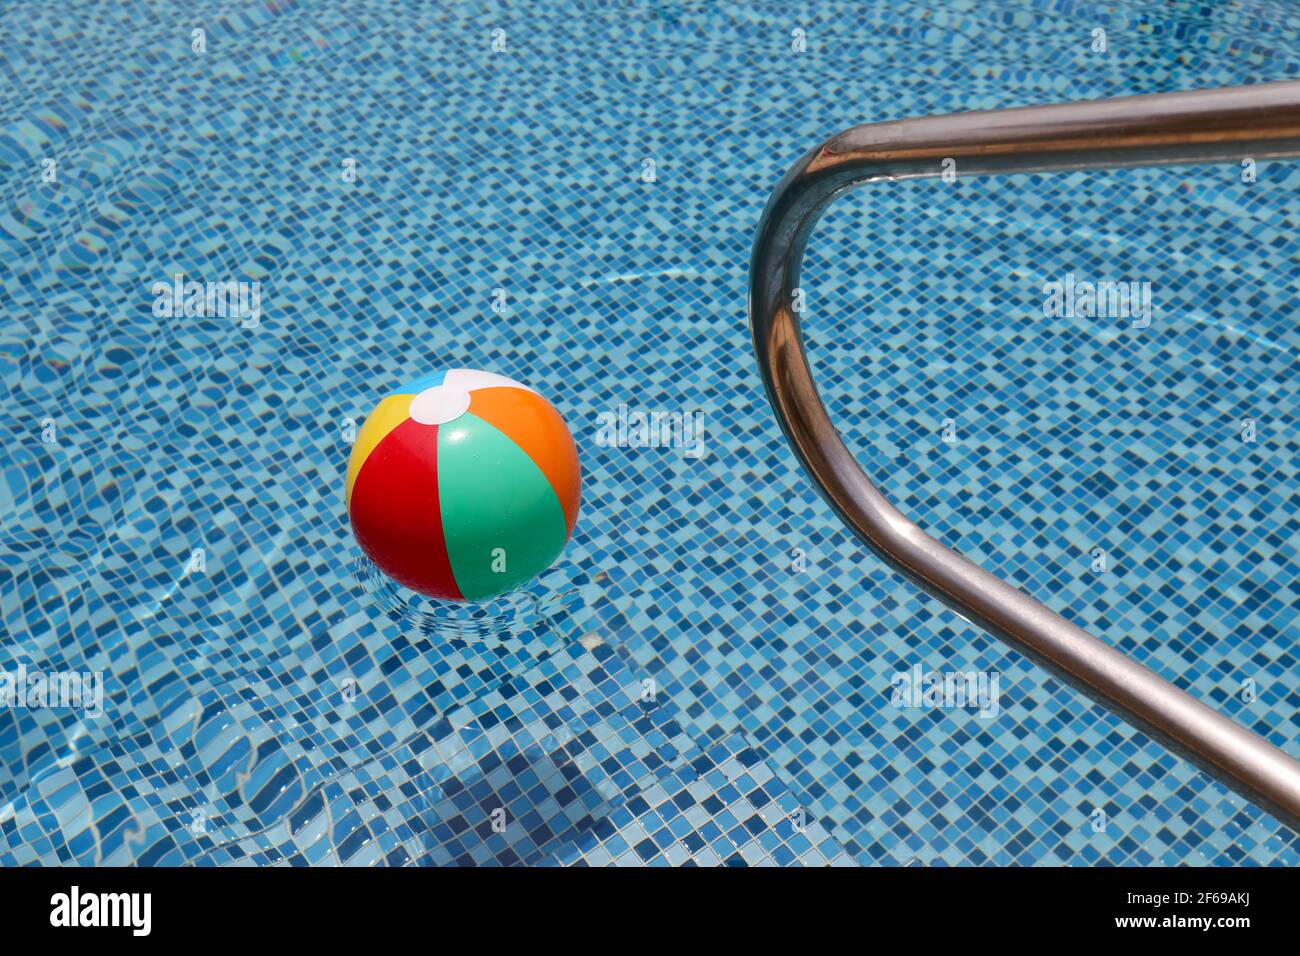 Beach ball in pool. Colorful inflatable ball floating in swimming pool, summer vacation concept. Stock Photo